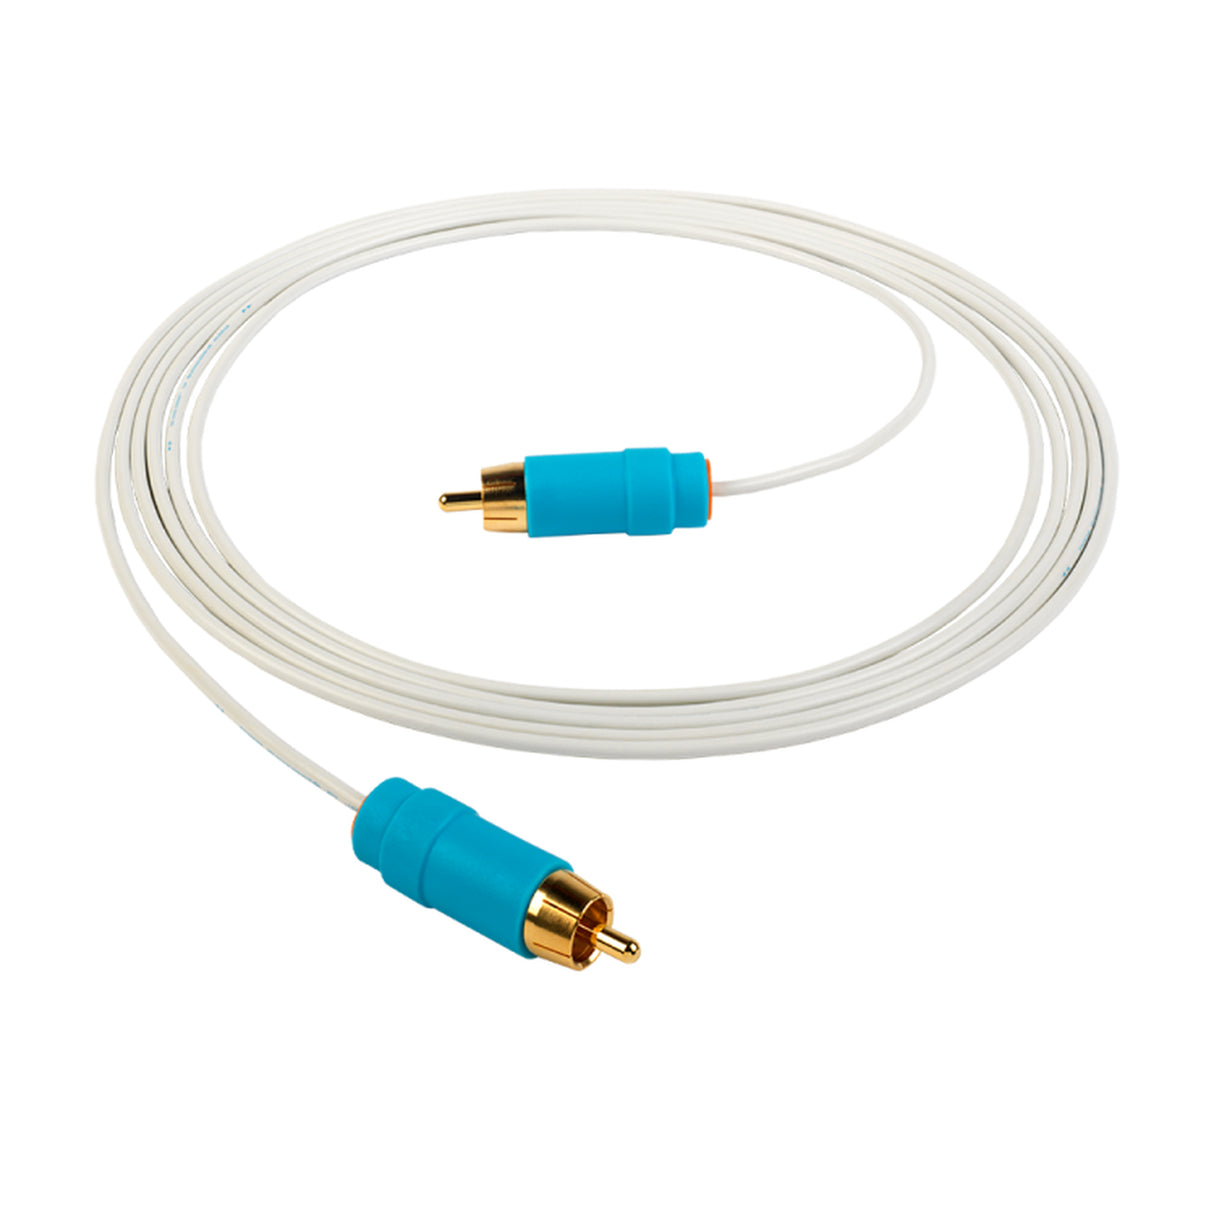 Chord C-line Analogue RCA/Subwoofer Cable (8 Meters)